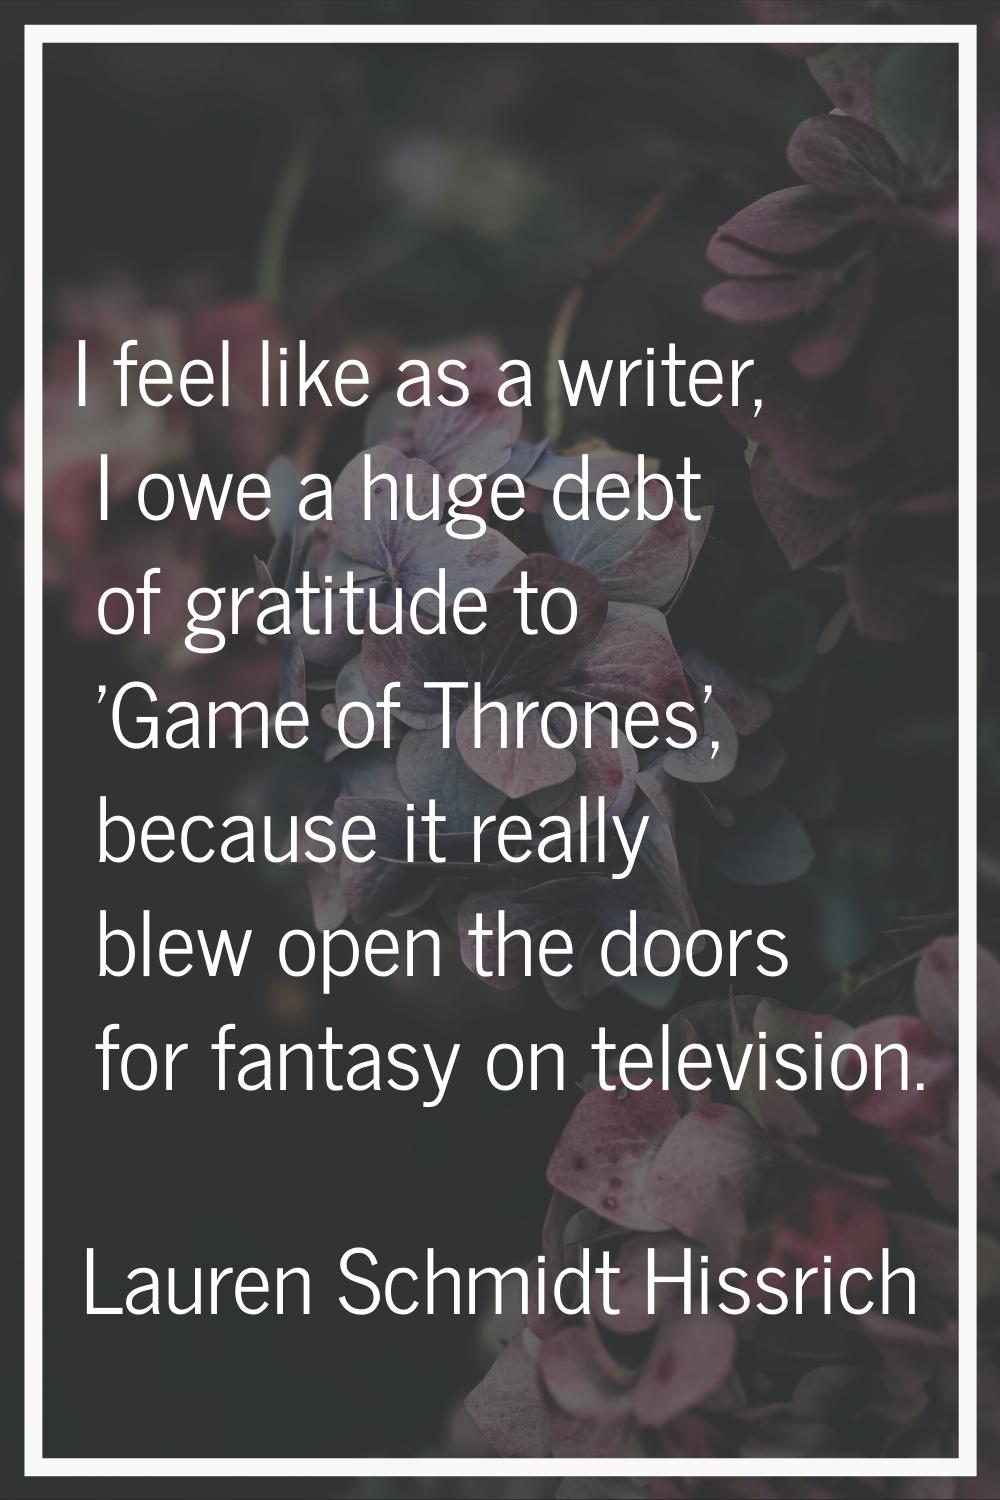 I feel like as a writer, I owe a huge debt of gratitude to 'Game of Thrones', because it really ble